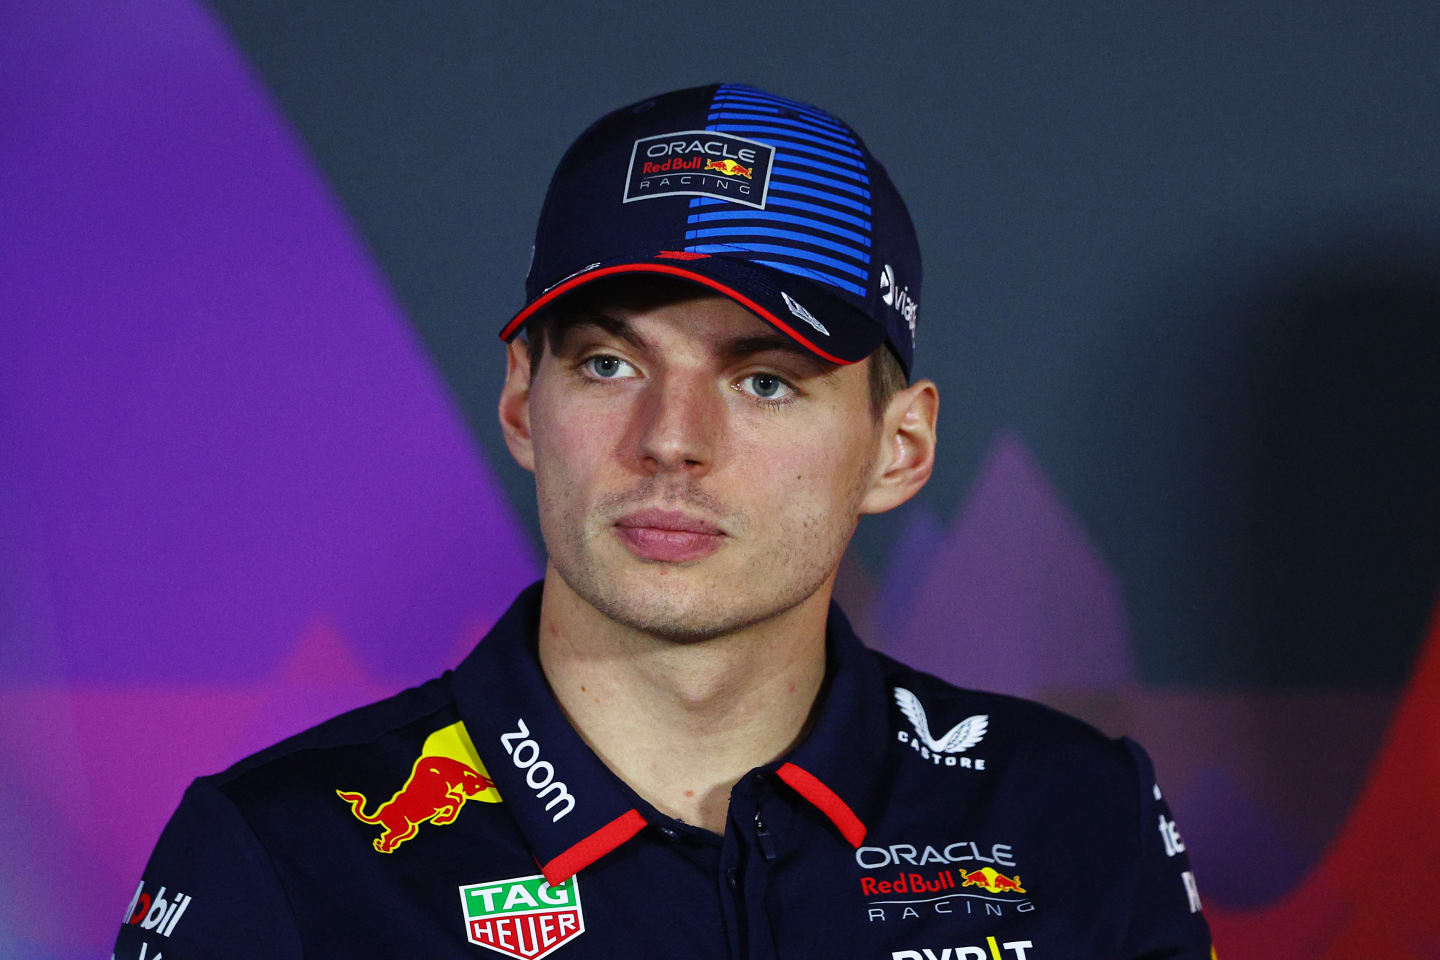 BAHRAIN, BAHRAIN - FEBRUARY 28: Max Verstappen of the Netherlands and Oracle Red Bull Racing attends the Drivers Press Conference during previews ahead of the F1 Grand Prix of Bahrain at Bahrain International Circuit on February 28, 2024 in Bahrain, Bahrain. (Photo by Clive Rose/Getty Images)